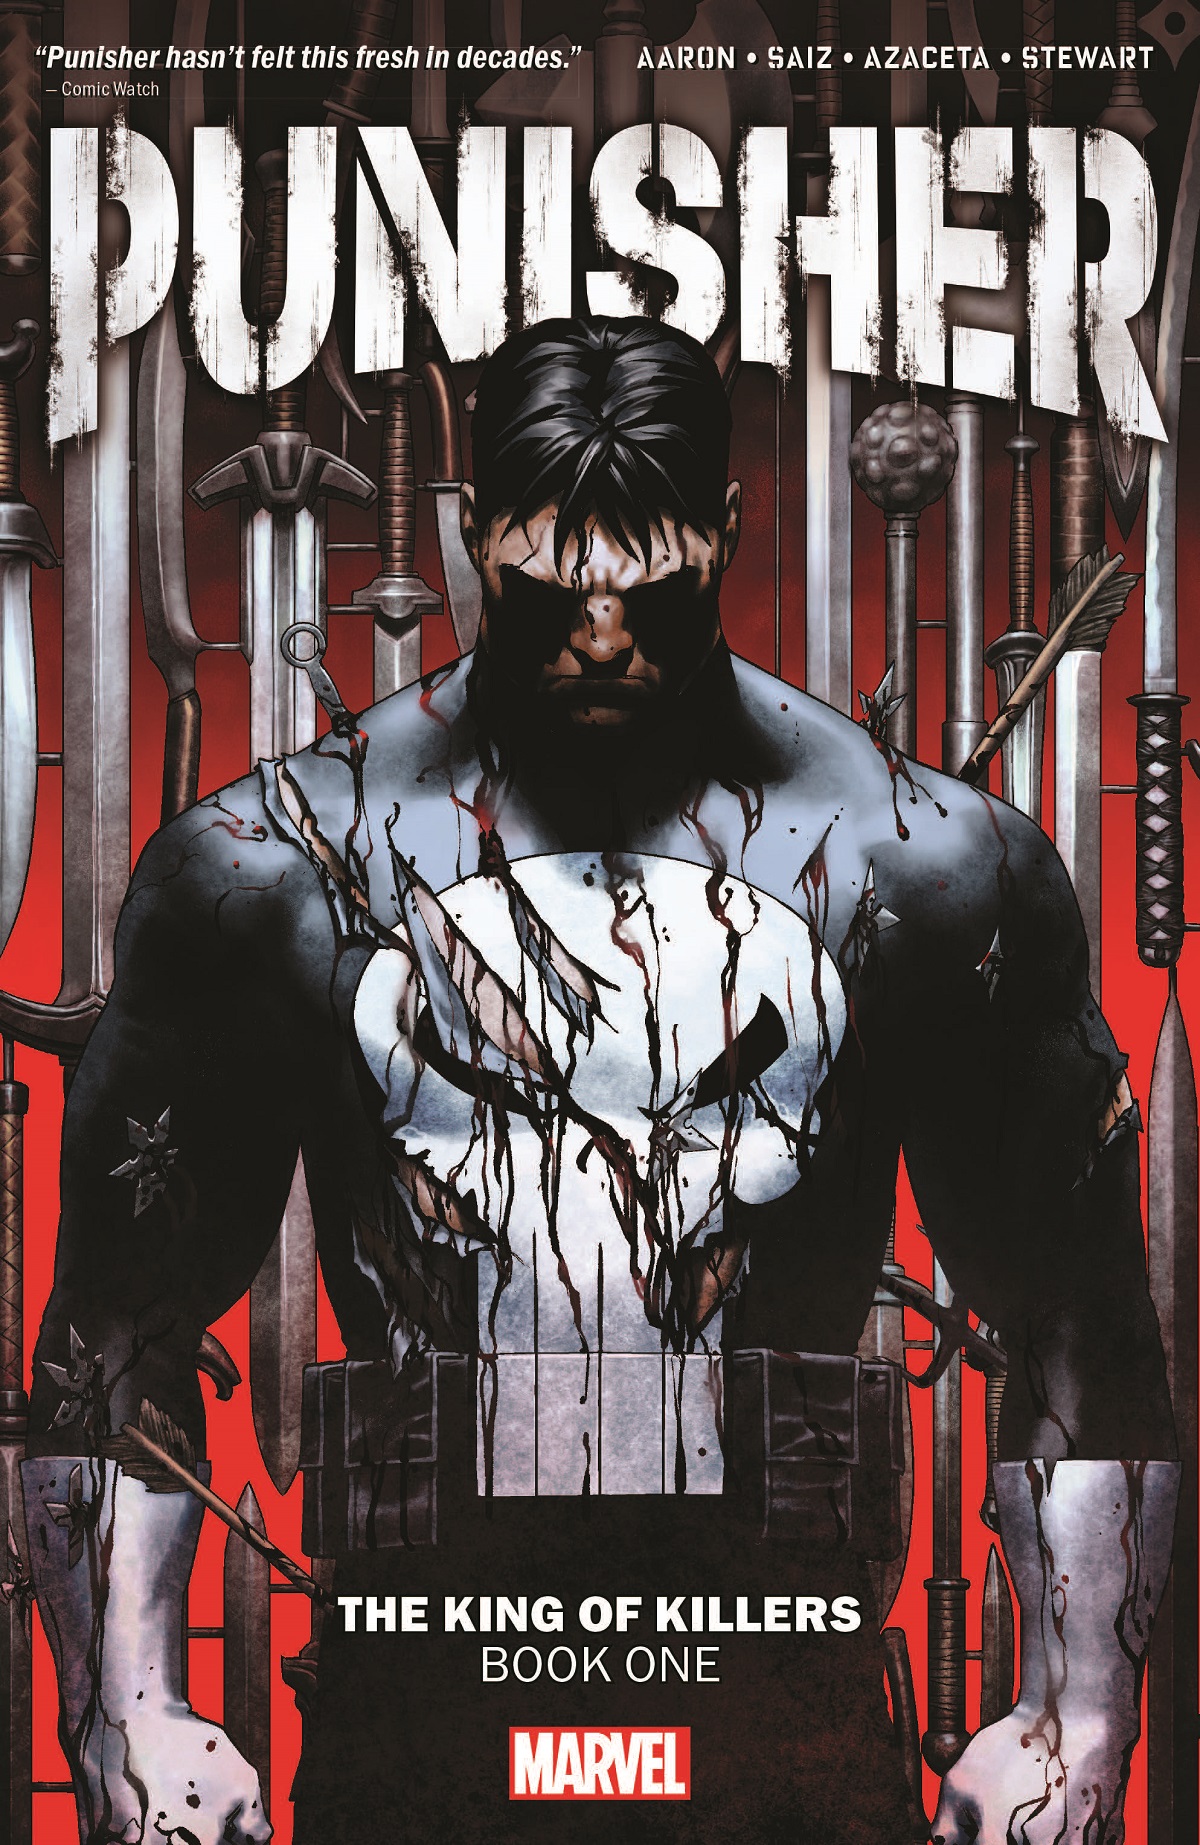 Punisher Vol. 1: The King Of Killers Book One (Trade Paperback)